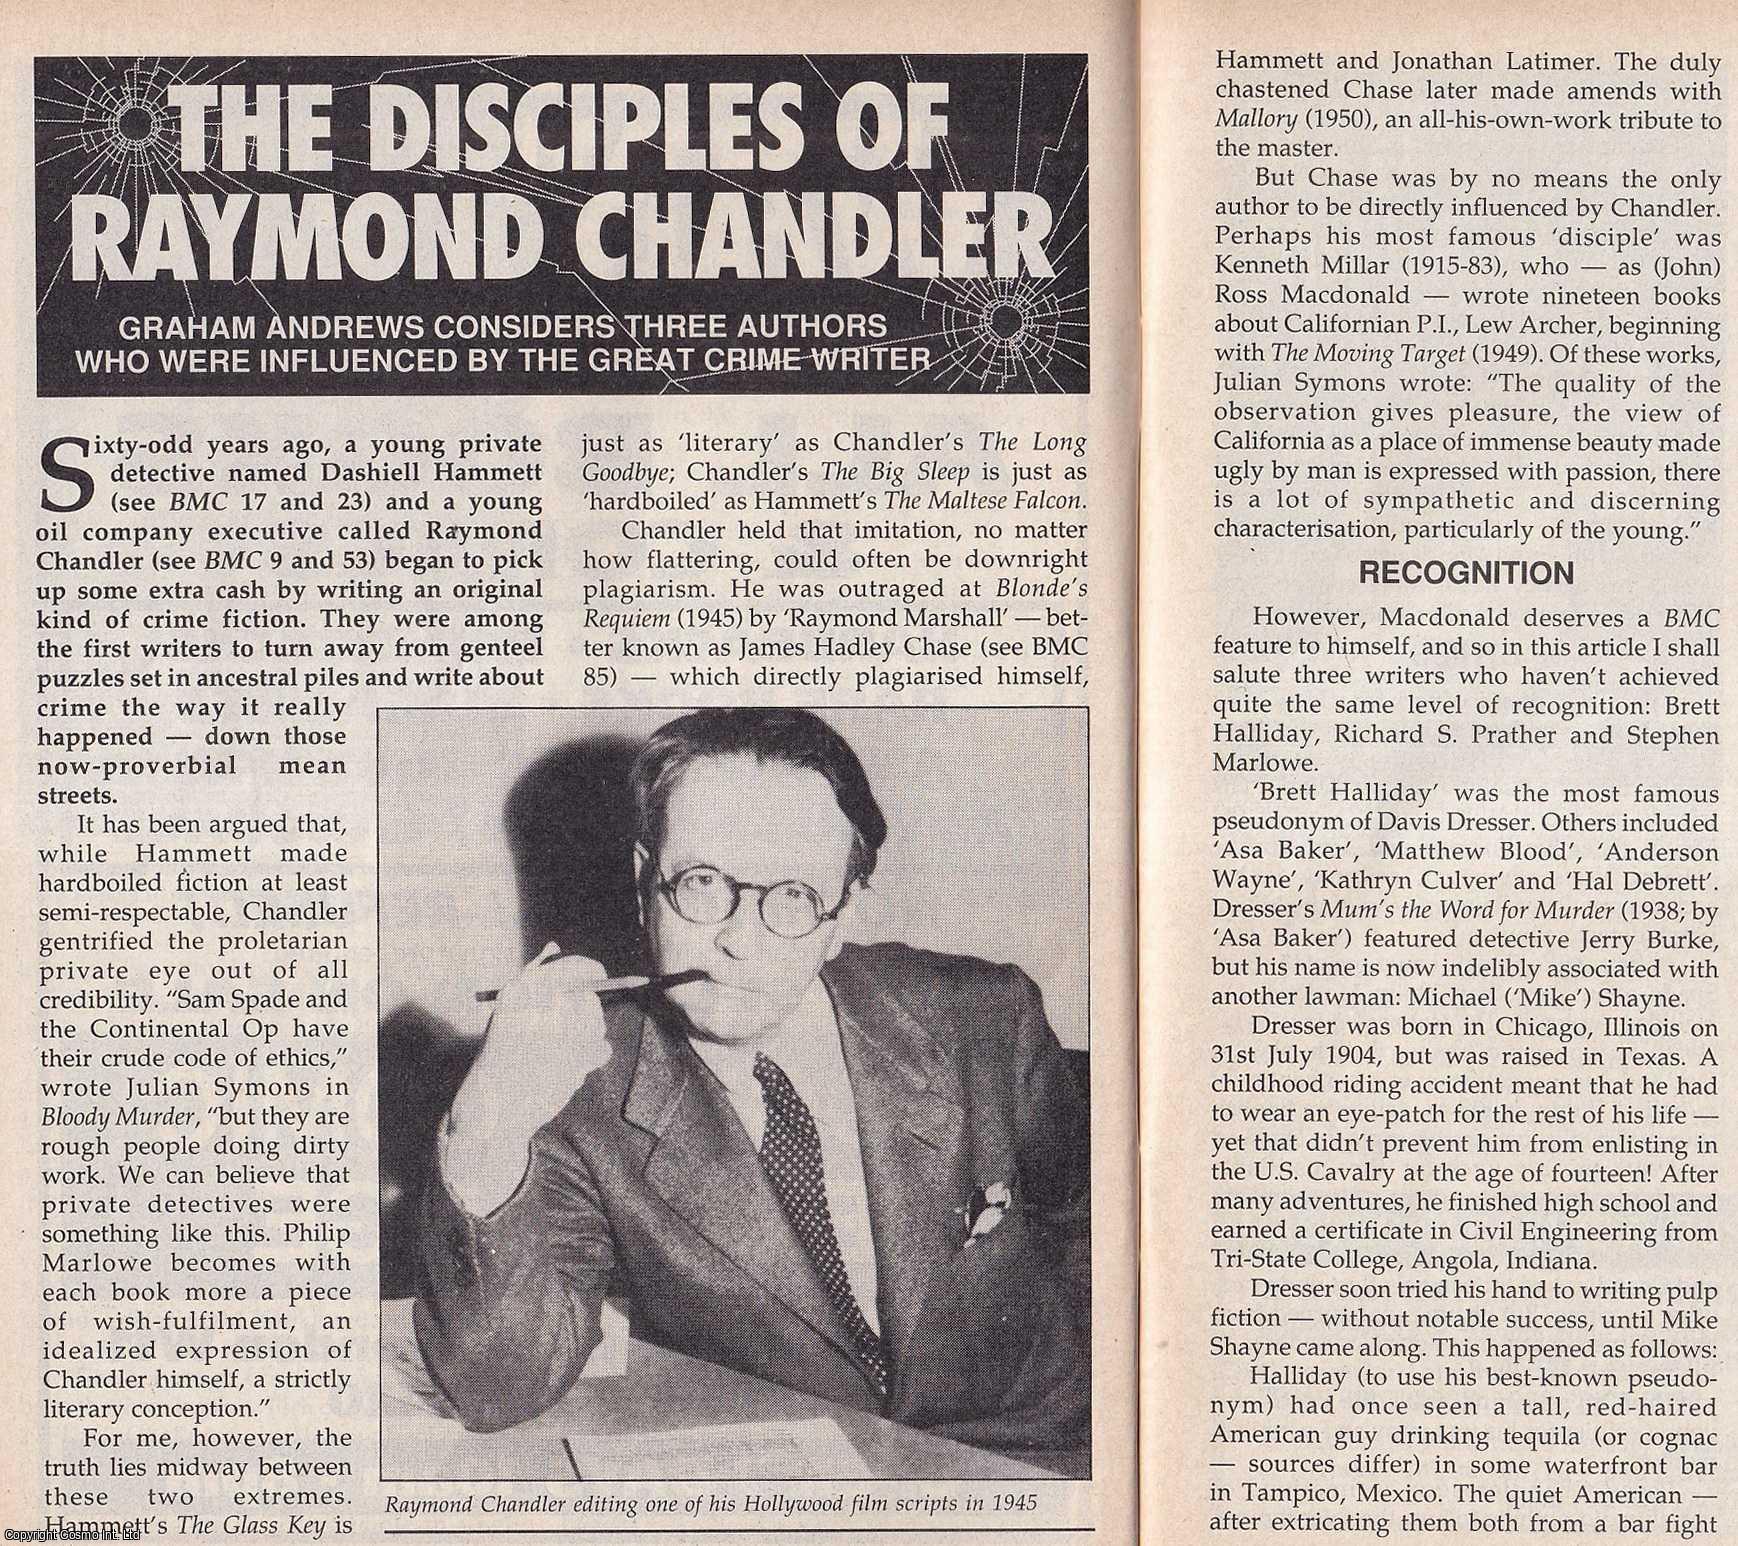 Graham Andrews - The Disciples of Raymond Chandler. Considering Three Authors who were Influenced by The Great Crime Writer. This is an original article separated from an issue of The Book & Magazine Collector publication.